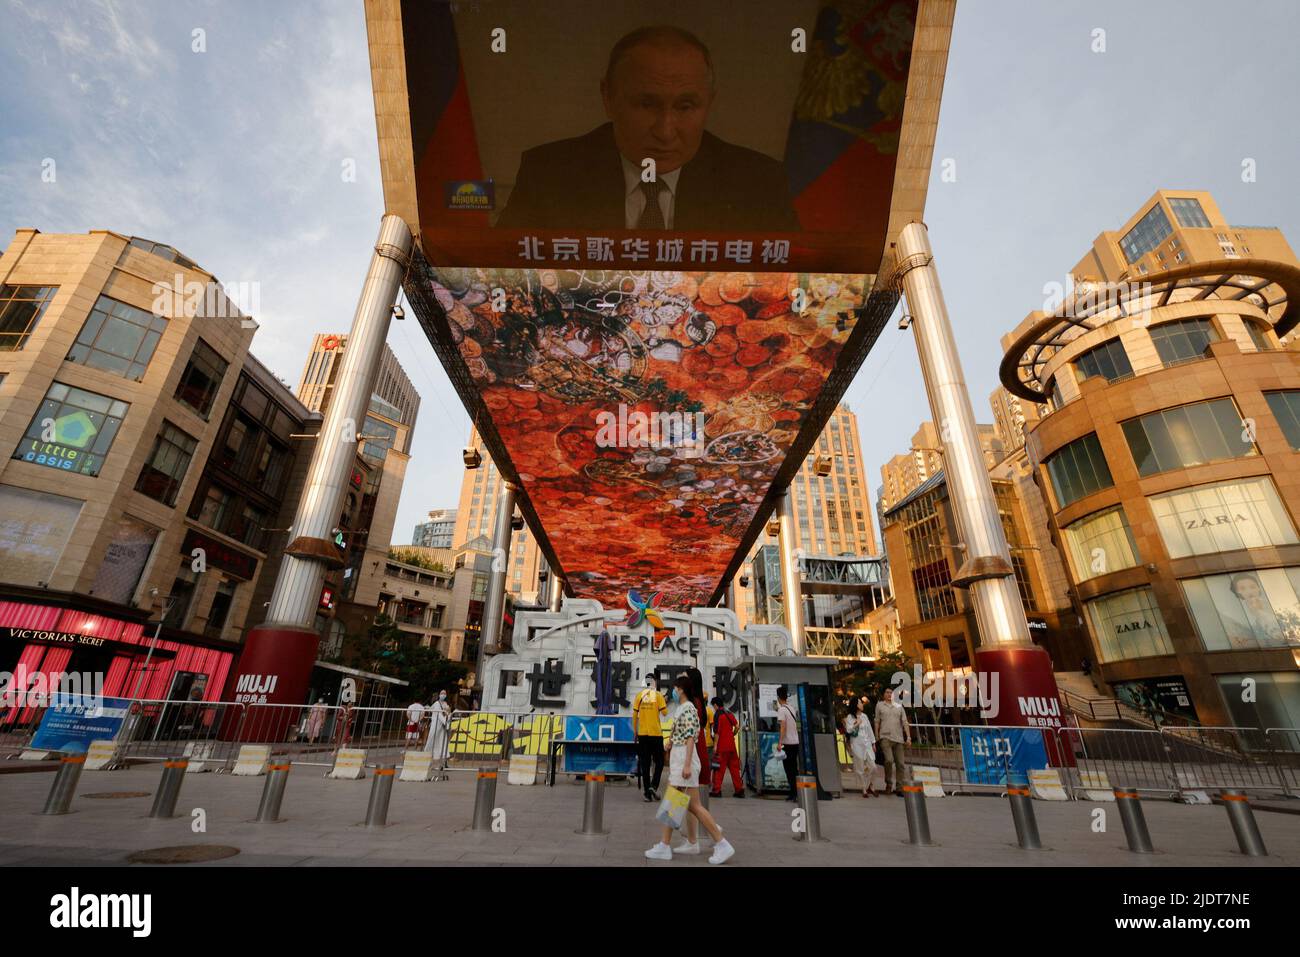 A screen shows a CCTV state media news broadcast of Russian President Vladimir Putin, addressing the BRICS Business Forum via video link, at a shopping center in Beijing, China, June 23, 2022.  REUTERS/Thomas Peter Stock Photo